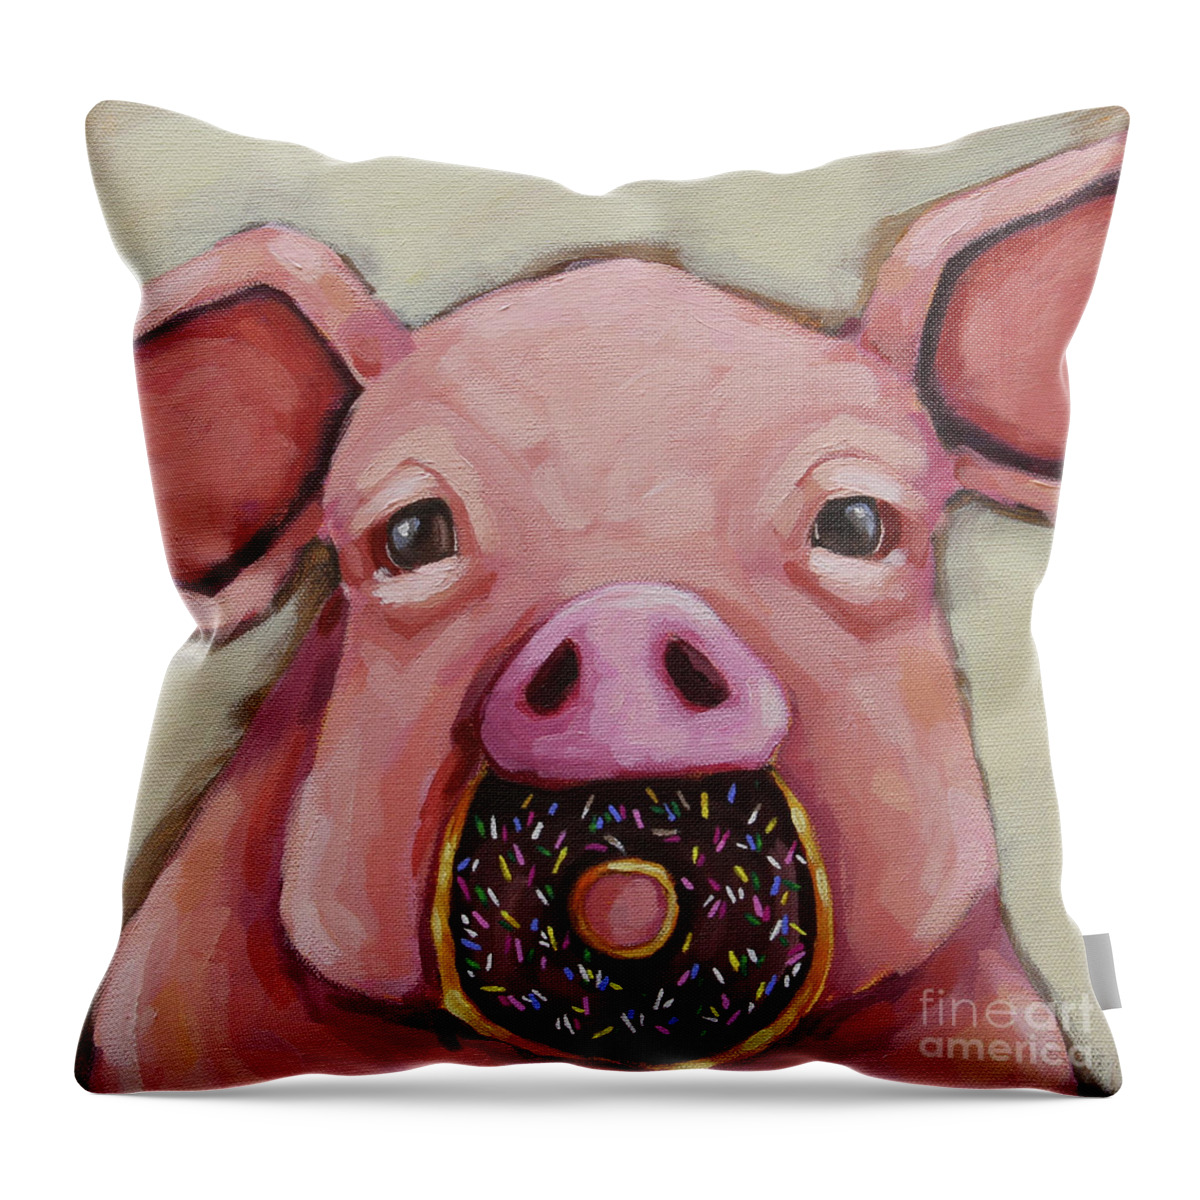 Pig Throw Pillow featuring the painting This Little Piggie #2 by Lucia Stewart